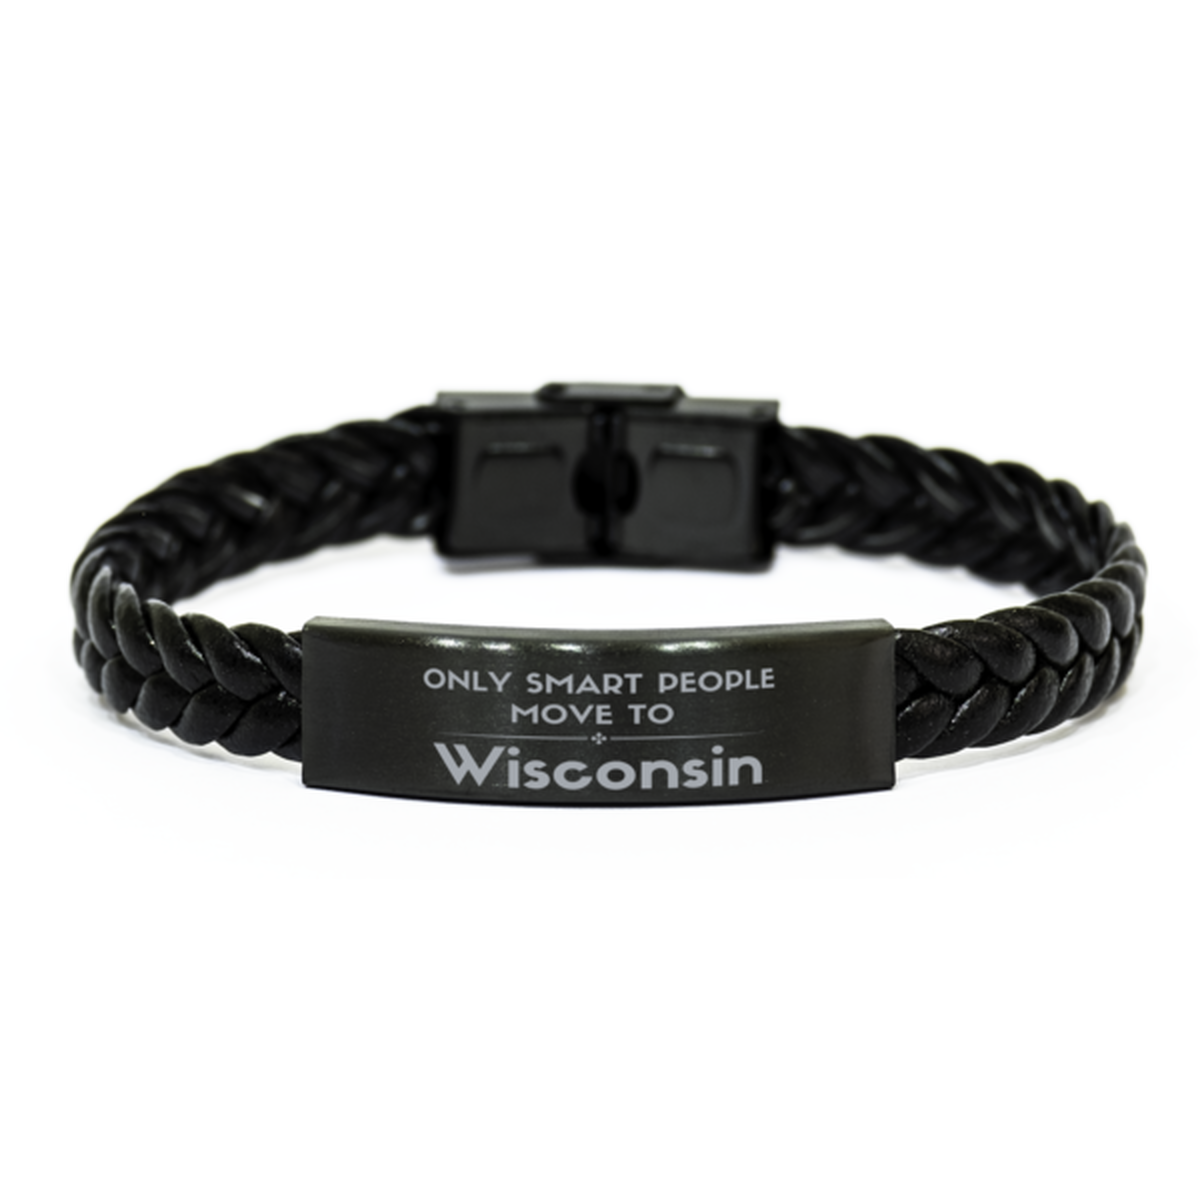 Only smart people move to Wisconsin Braided Leather Bracelet, Gag Gifts For Wisconsin, Move to Wisconsin Gifts for Friends Coworker Funny Saying Quote